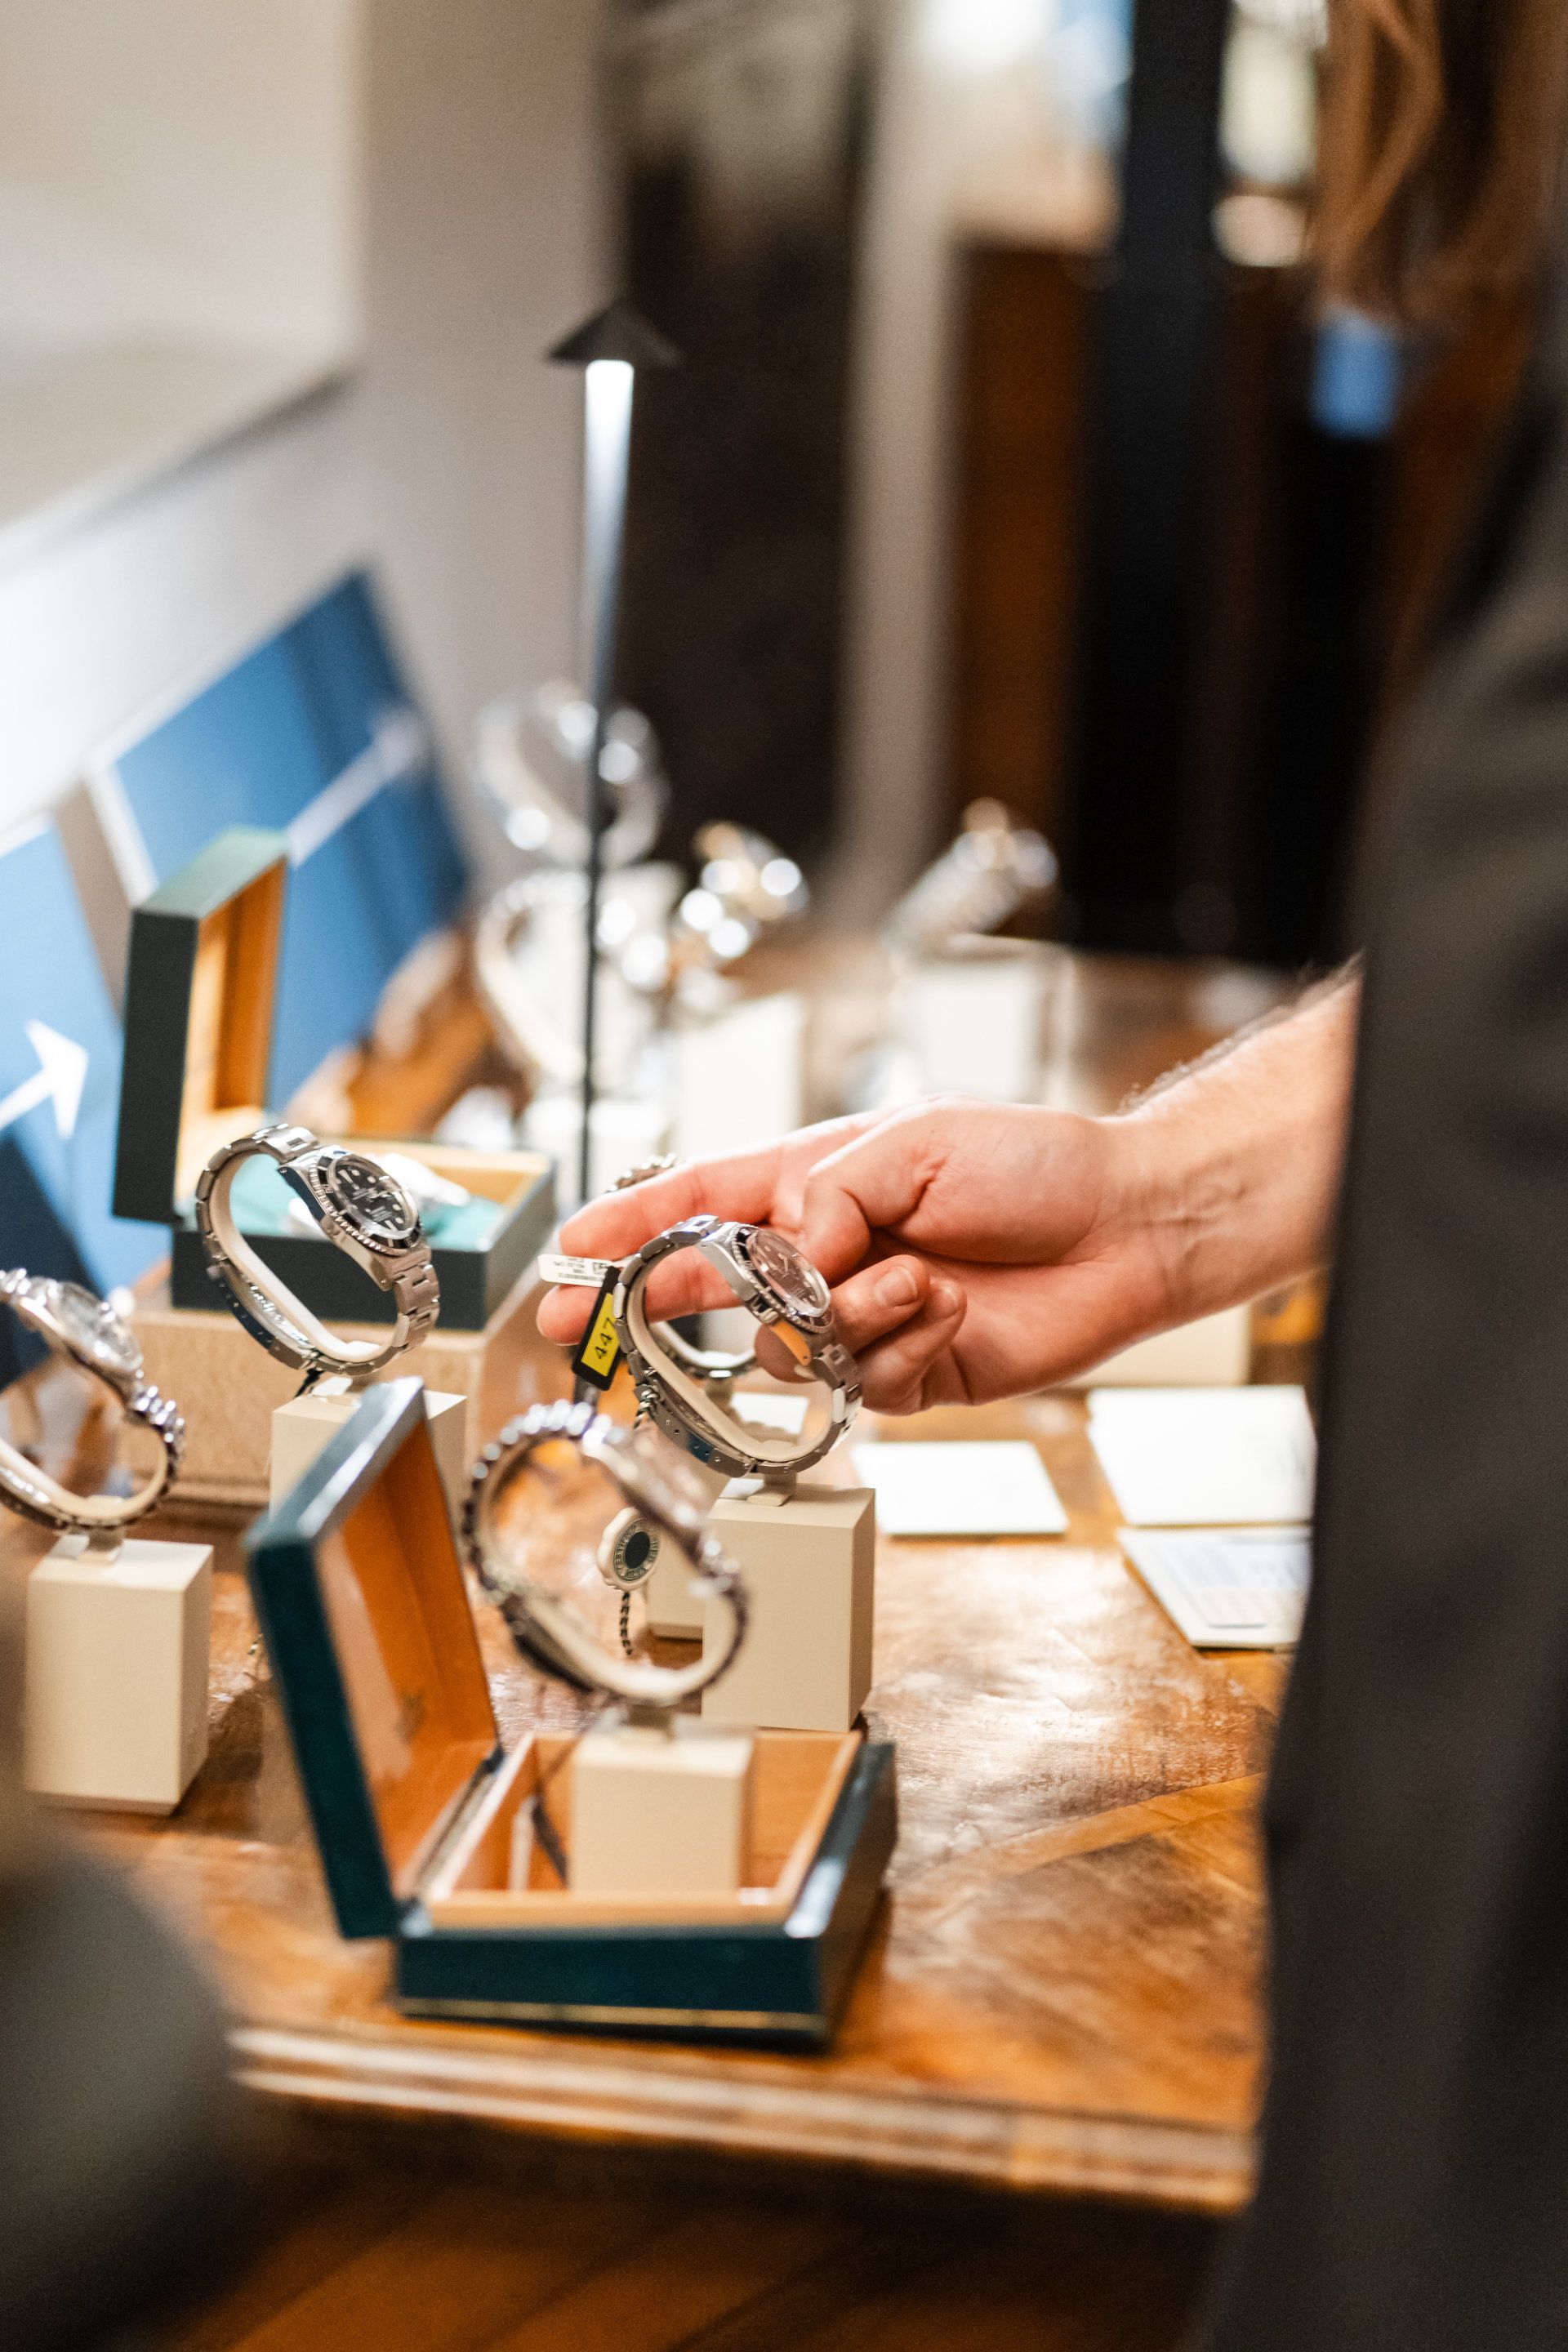 A person examines a luxury watch at a display counter, highlighting the careful consideration given to choosing a high-quality timepiece for an event showcase.